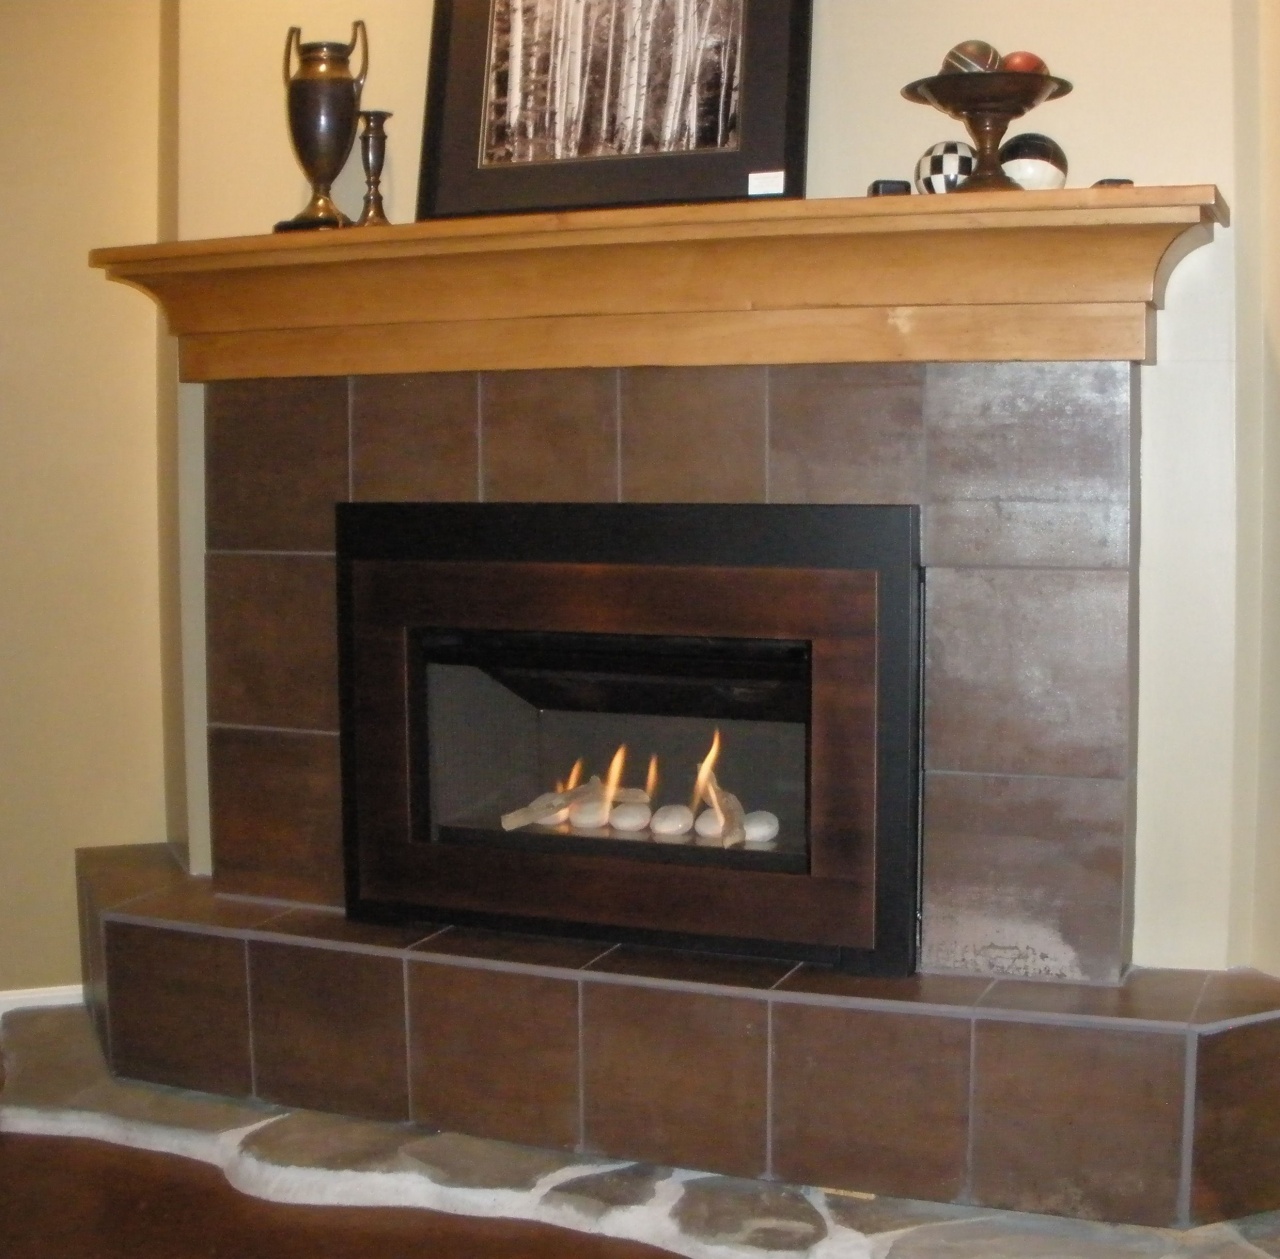 Majestic Gas Fireplace Troubleshooting Inspirational Gas Fireplace Repair Raleigh Nc – Fireplace Ideas From "gas